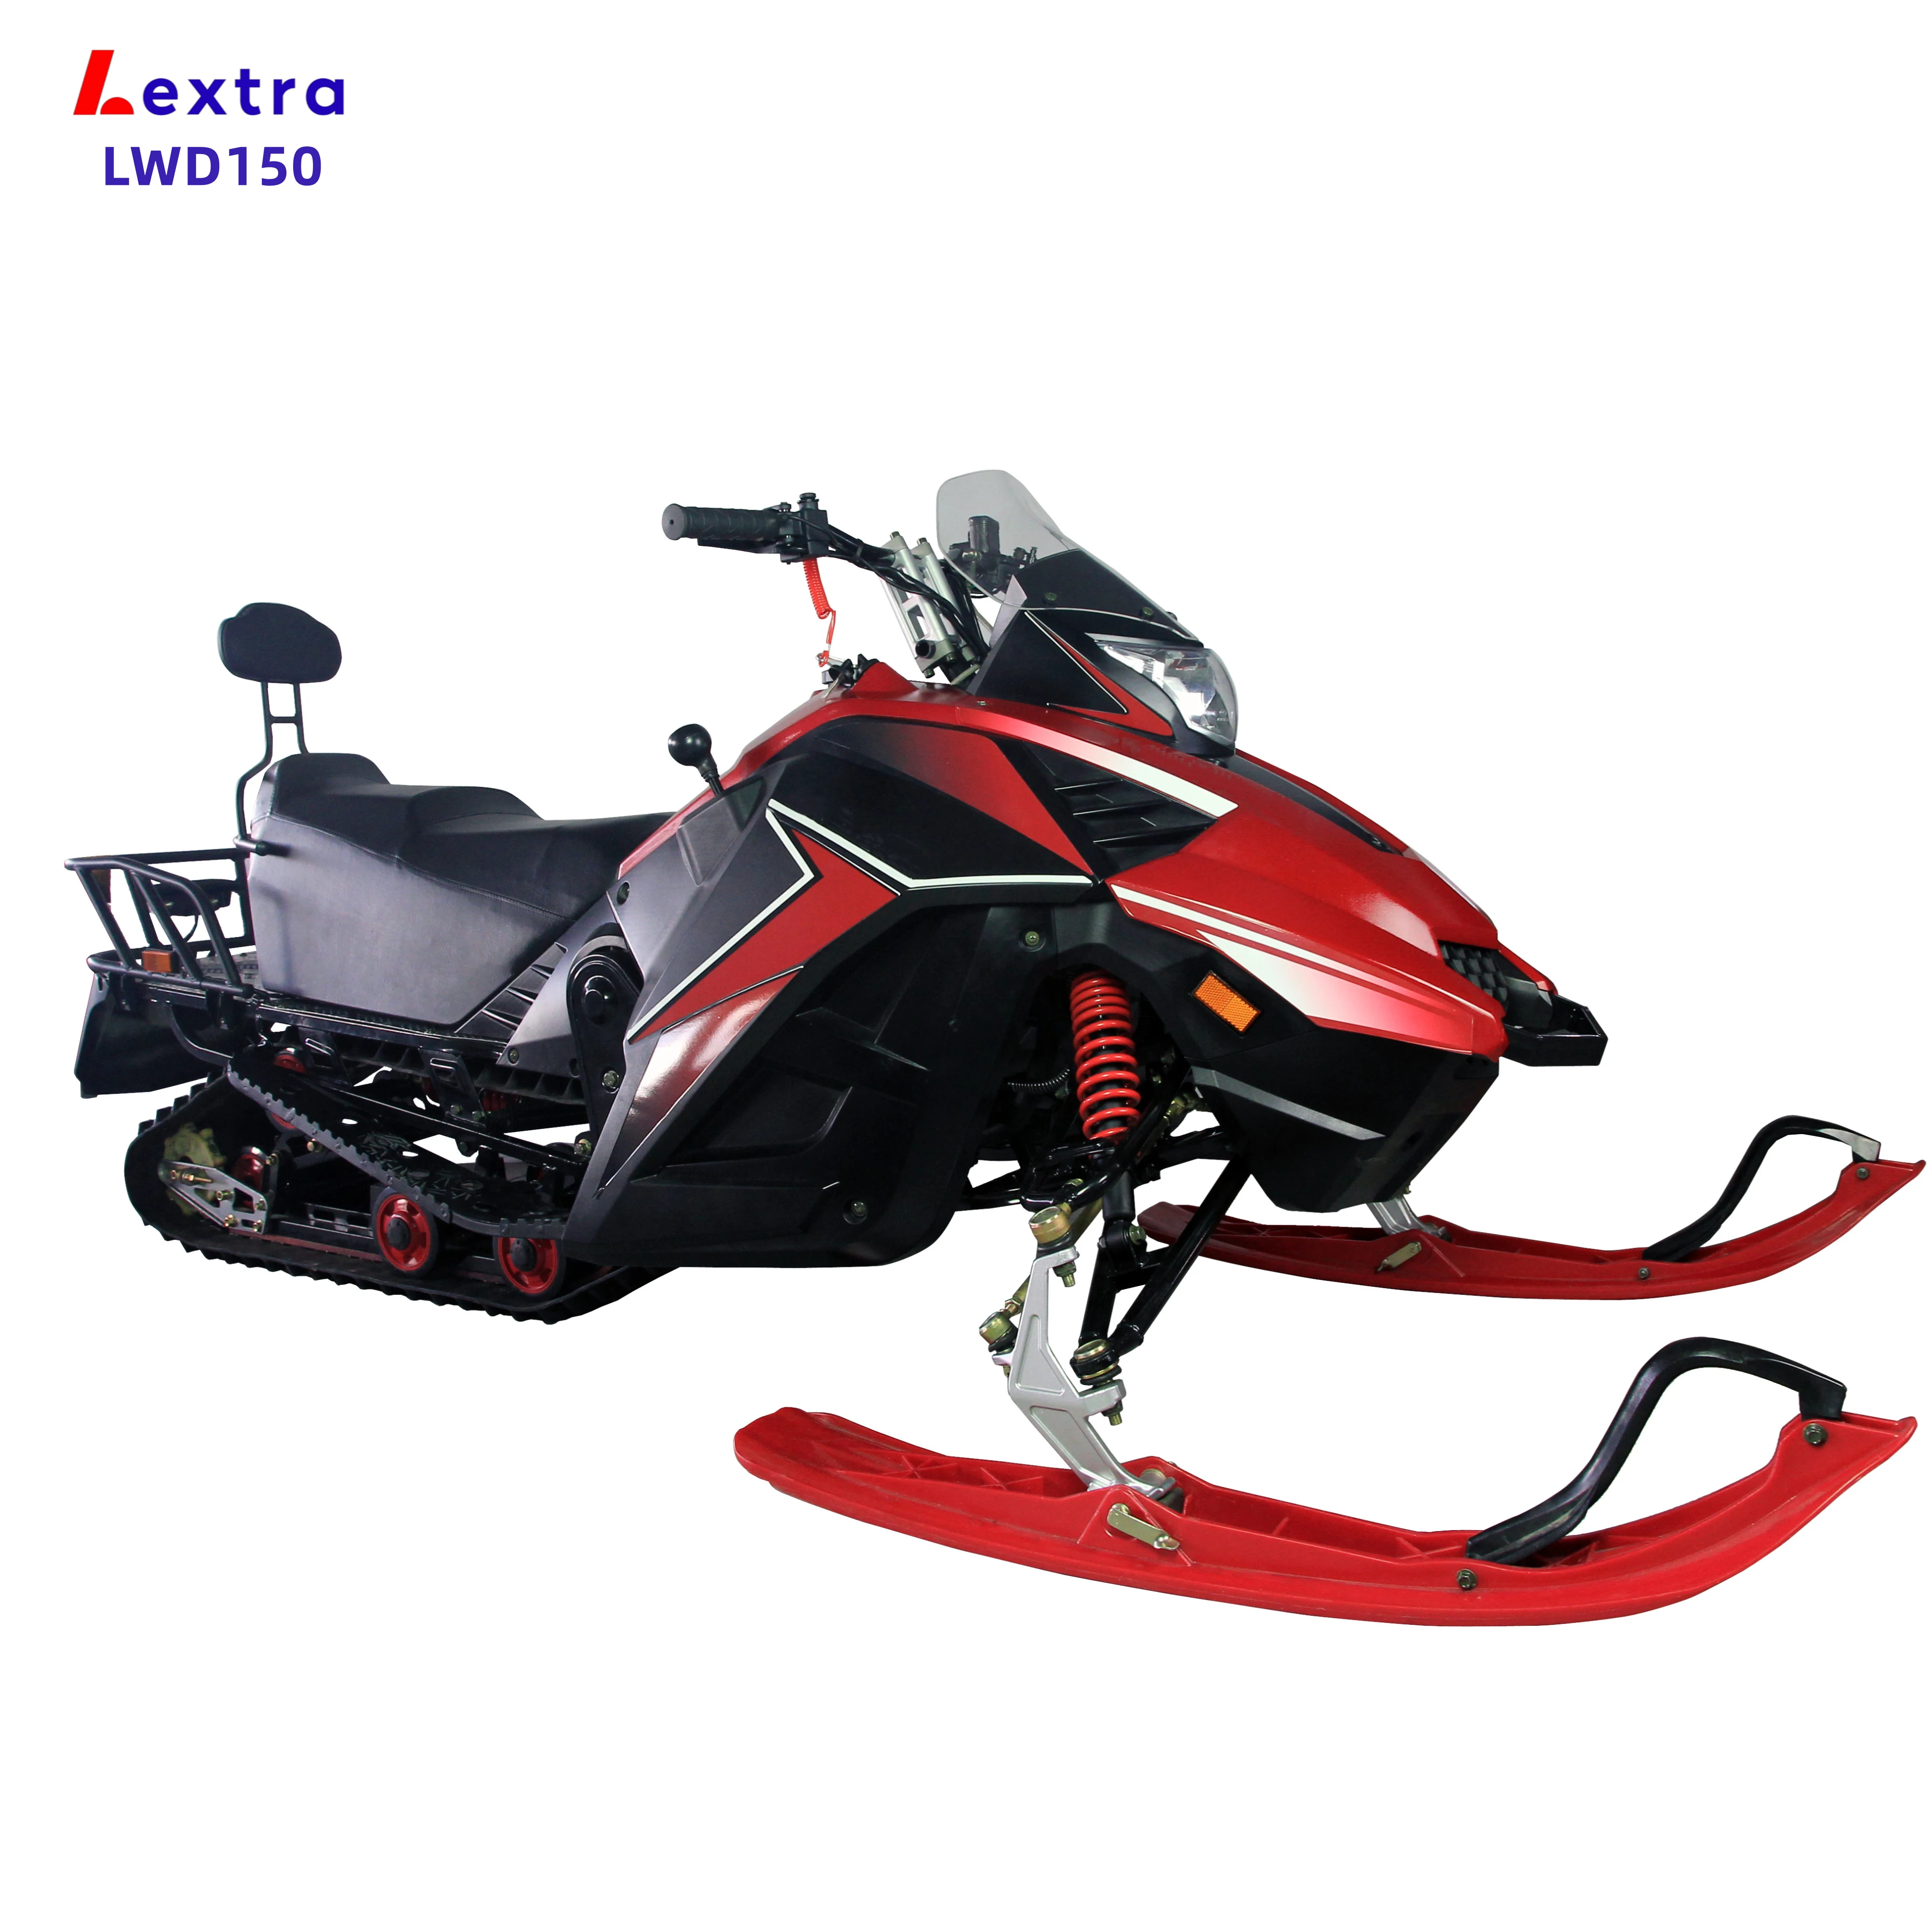 Lextra Adults Snowmobiles Chinese Children Snowmobile 150cc Snowscooter Snowmobile Snow Mobile Snow Vehicle